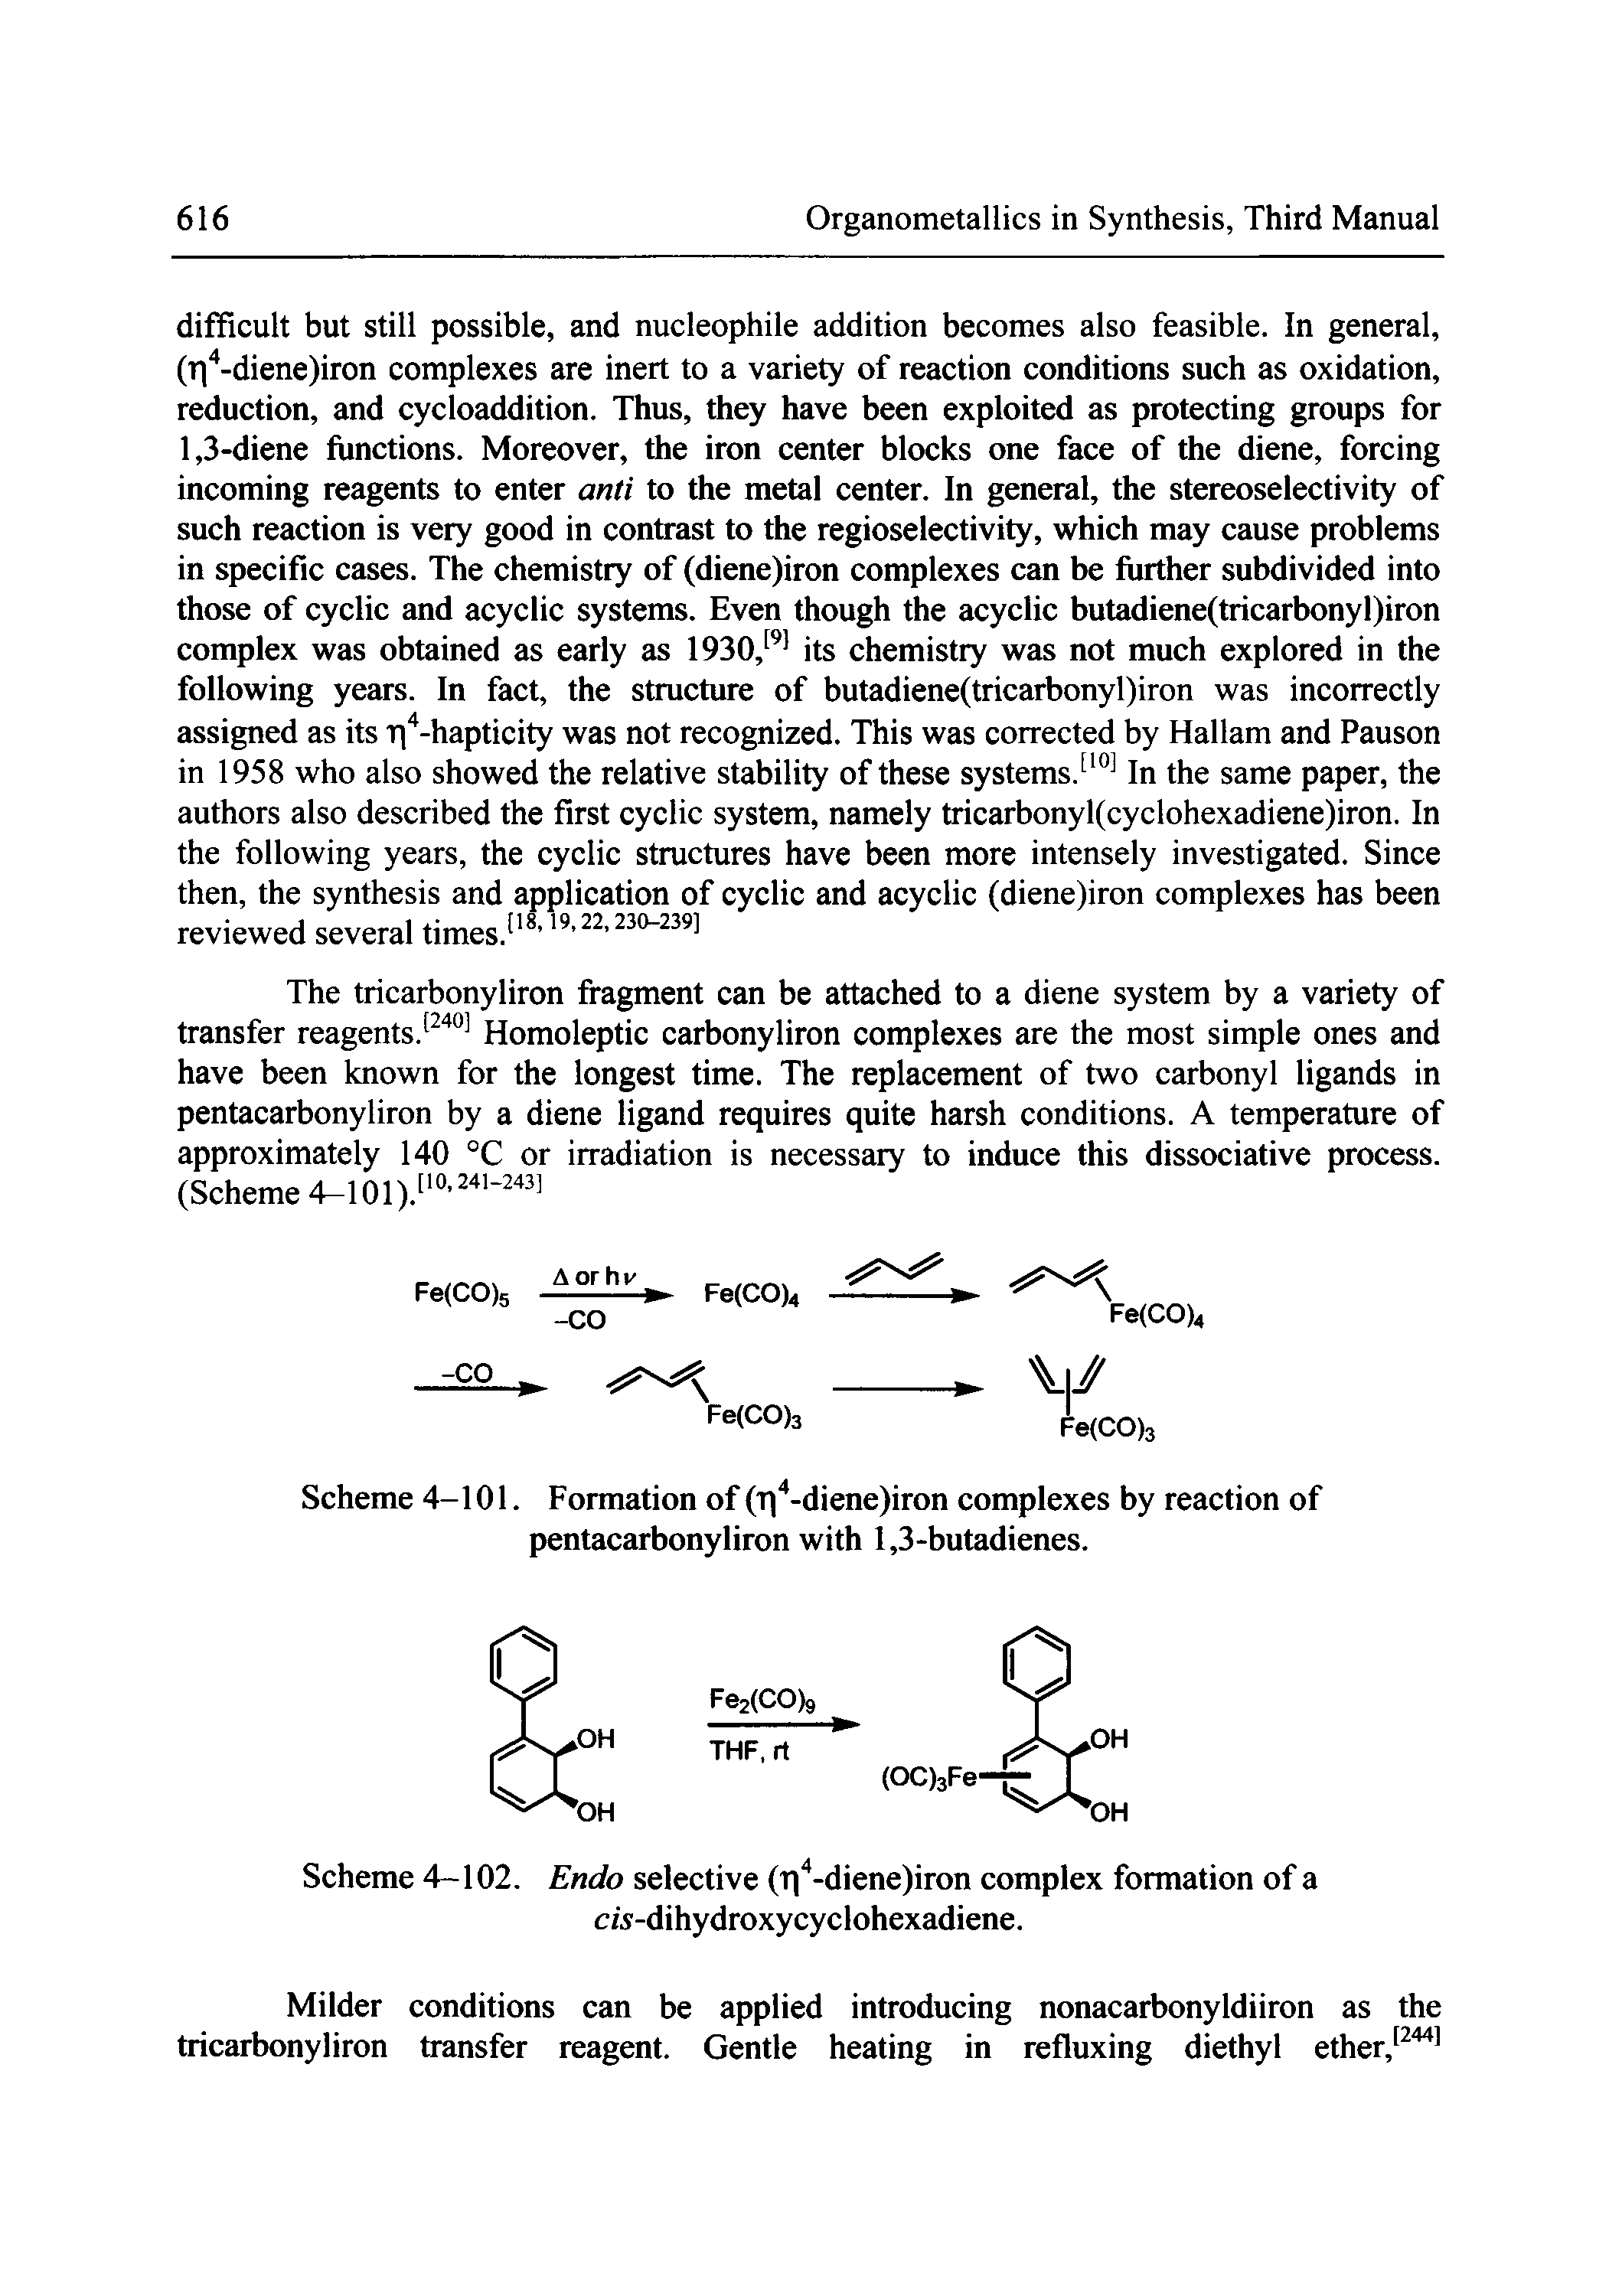 Scheme 4-101. Formation of ( q -diene)iron complexes by reaction of pentacarbonyliron with 1,3-butadienes.